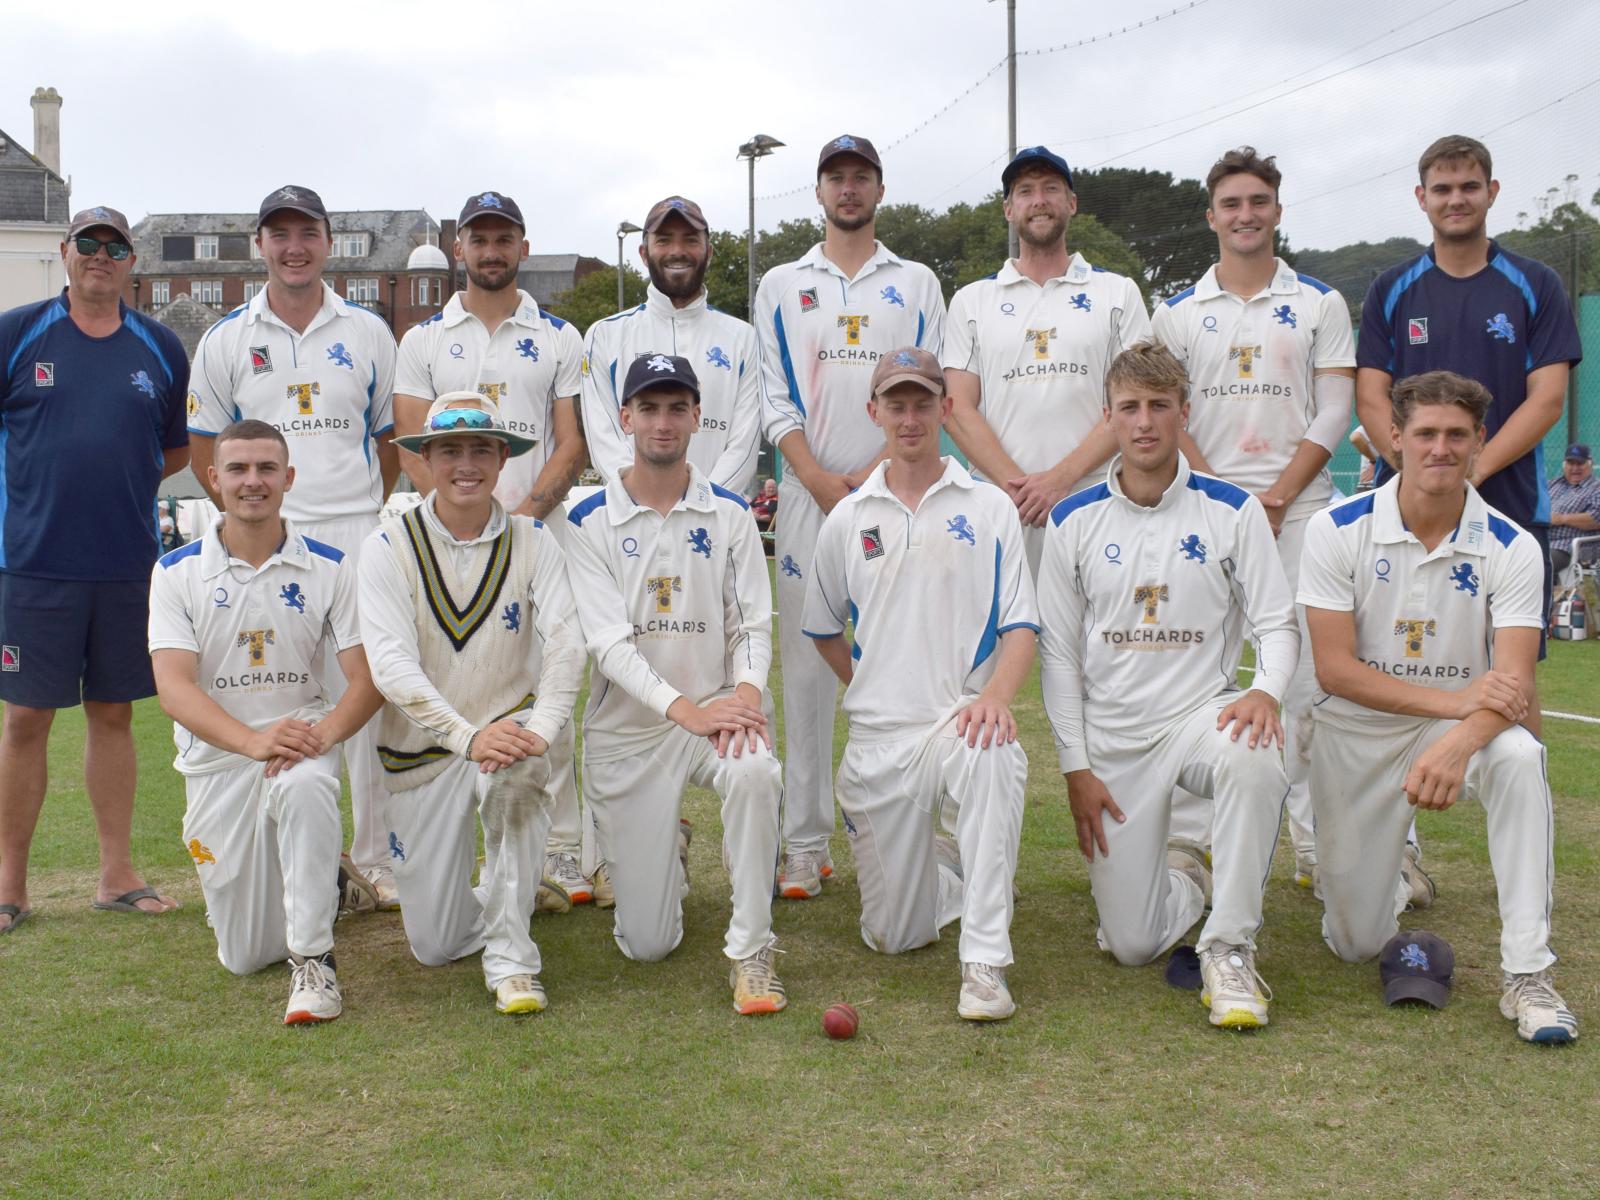 The Devon team that won promotion from Division Two West in 2022. Back (left to right): Tall, Skeemer, Goodey, Thompson, Whitlock, Haggett, Szymanski, Walliker; front: Beaumont, Small, Shepherd, Stephens, Horler, Hamilton<br>credit: Conrad Sutcliffe